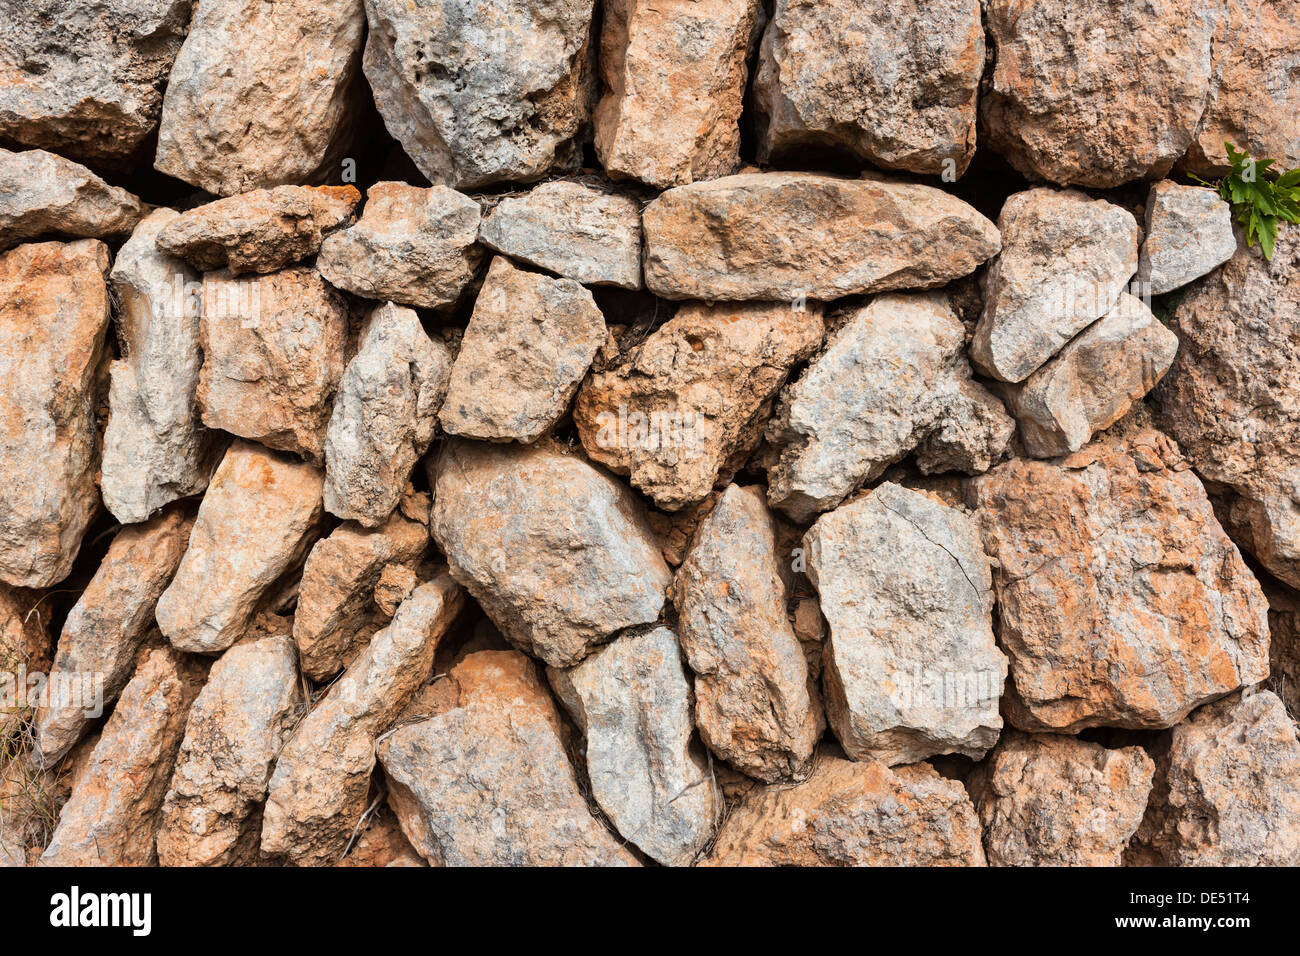 Sandstones for typical Majorcan architecture, Fornalutx, Mallorca, Majorca, Balearic Islands, Spain, Europe Stock Photo